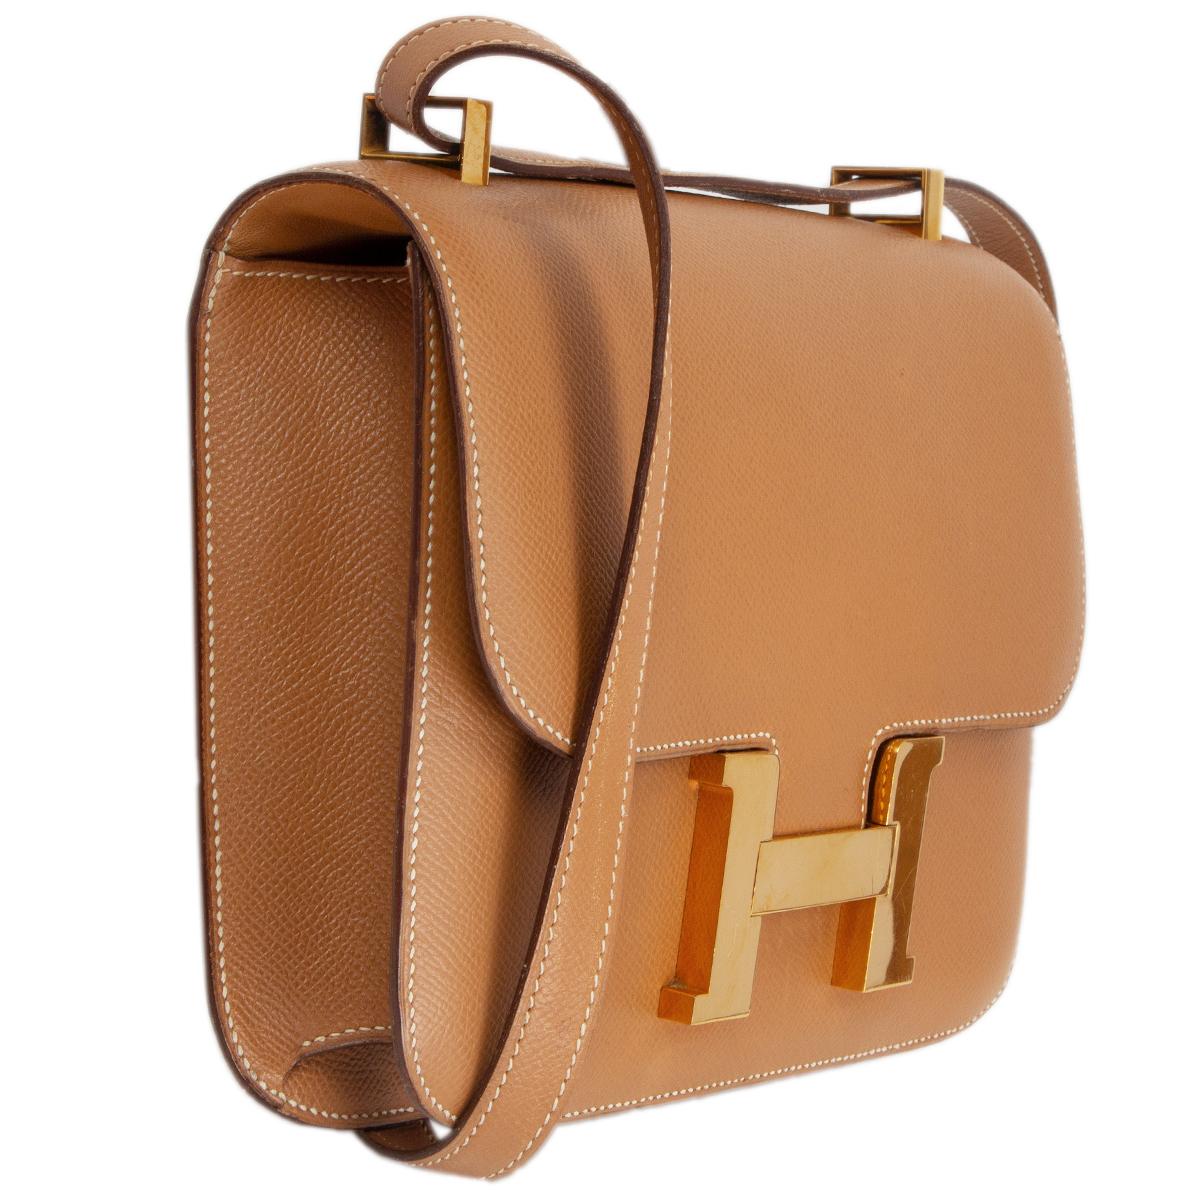 100% authentic Hermès Constance 23 shoulder bag in Naturelle Courchevel leather featuring gold-tone hardware. Vintage from 1988. Lined in beige lambskin with one zipper pocket against the back and one open pocket against the front. Has been carried